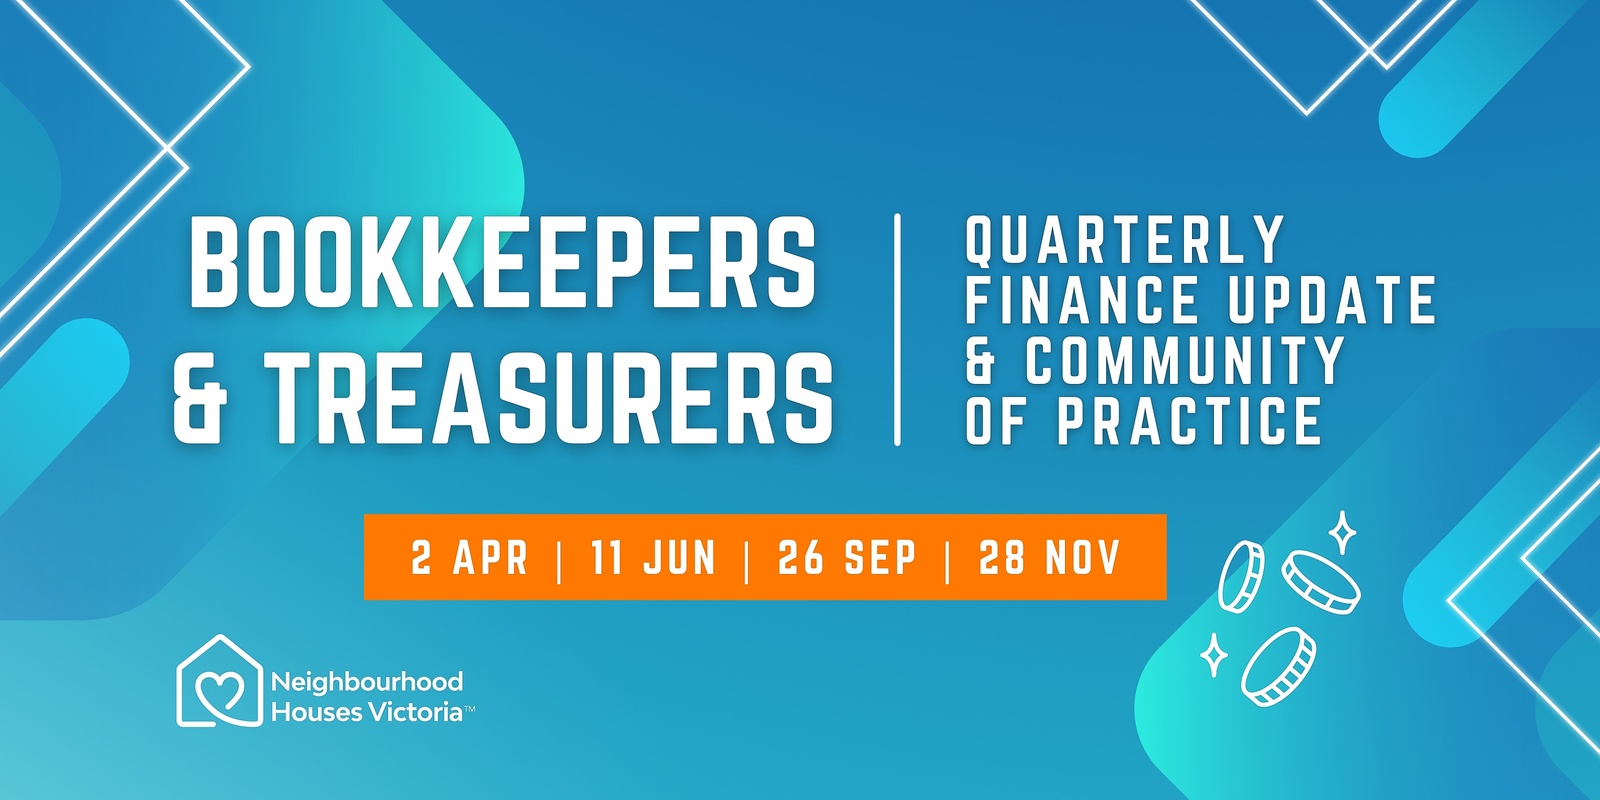 Banner image for Bookkeepers & Treasurers: Quarterly finance update #3 & community of practice 